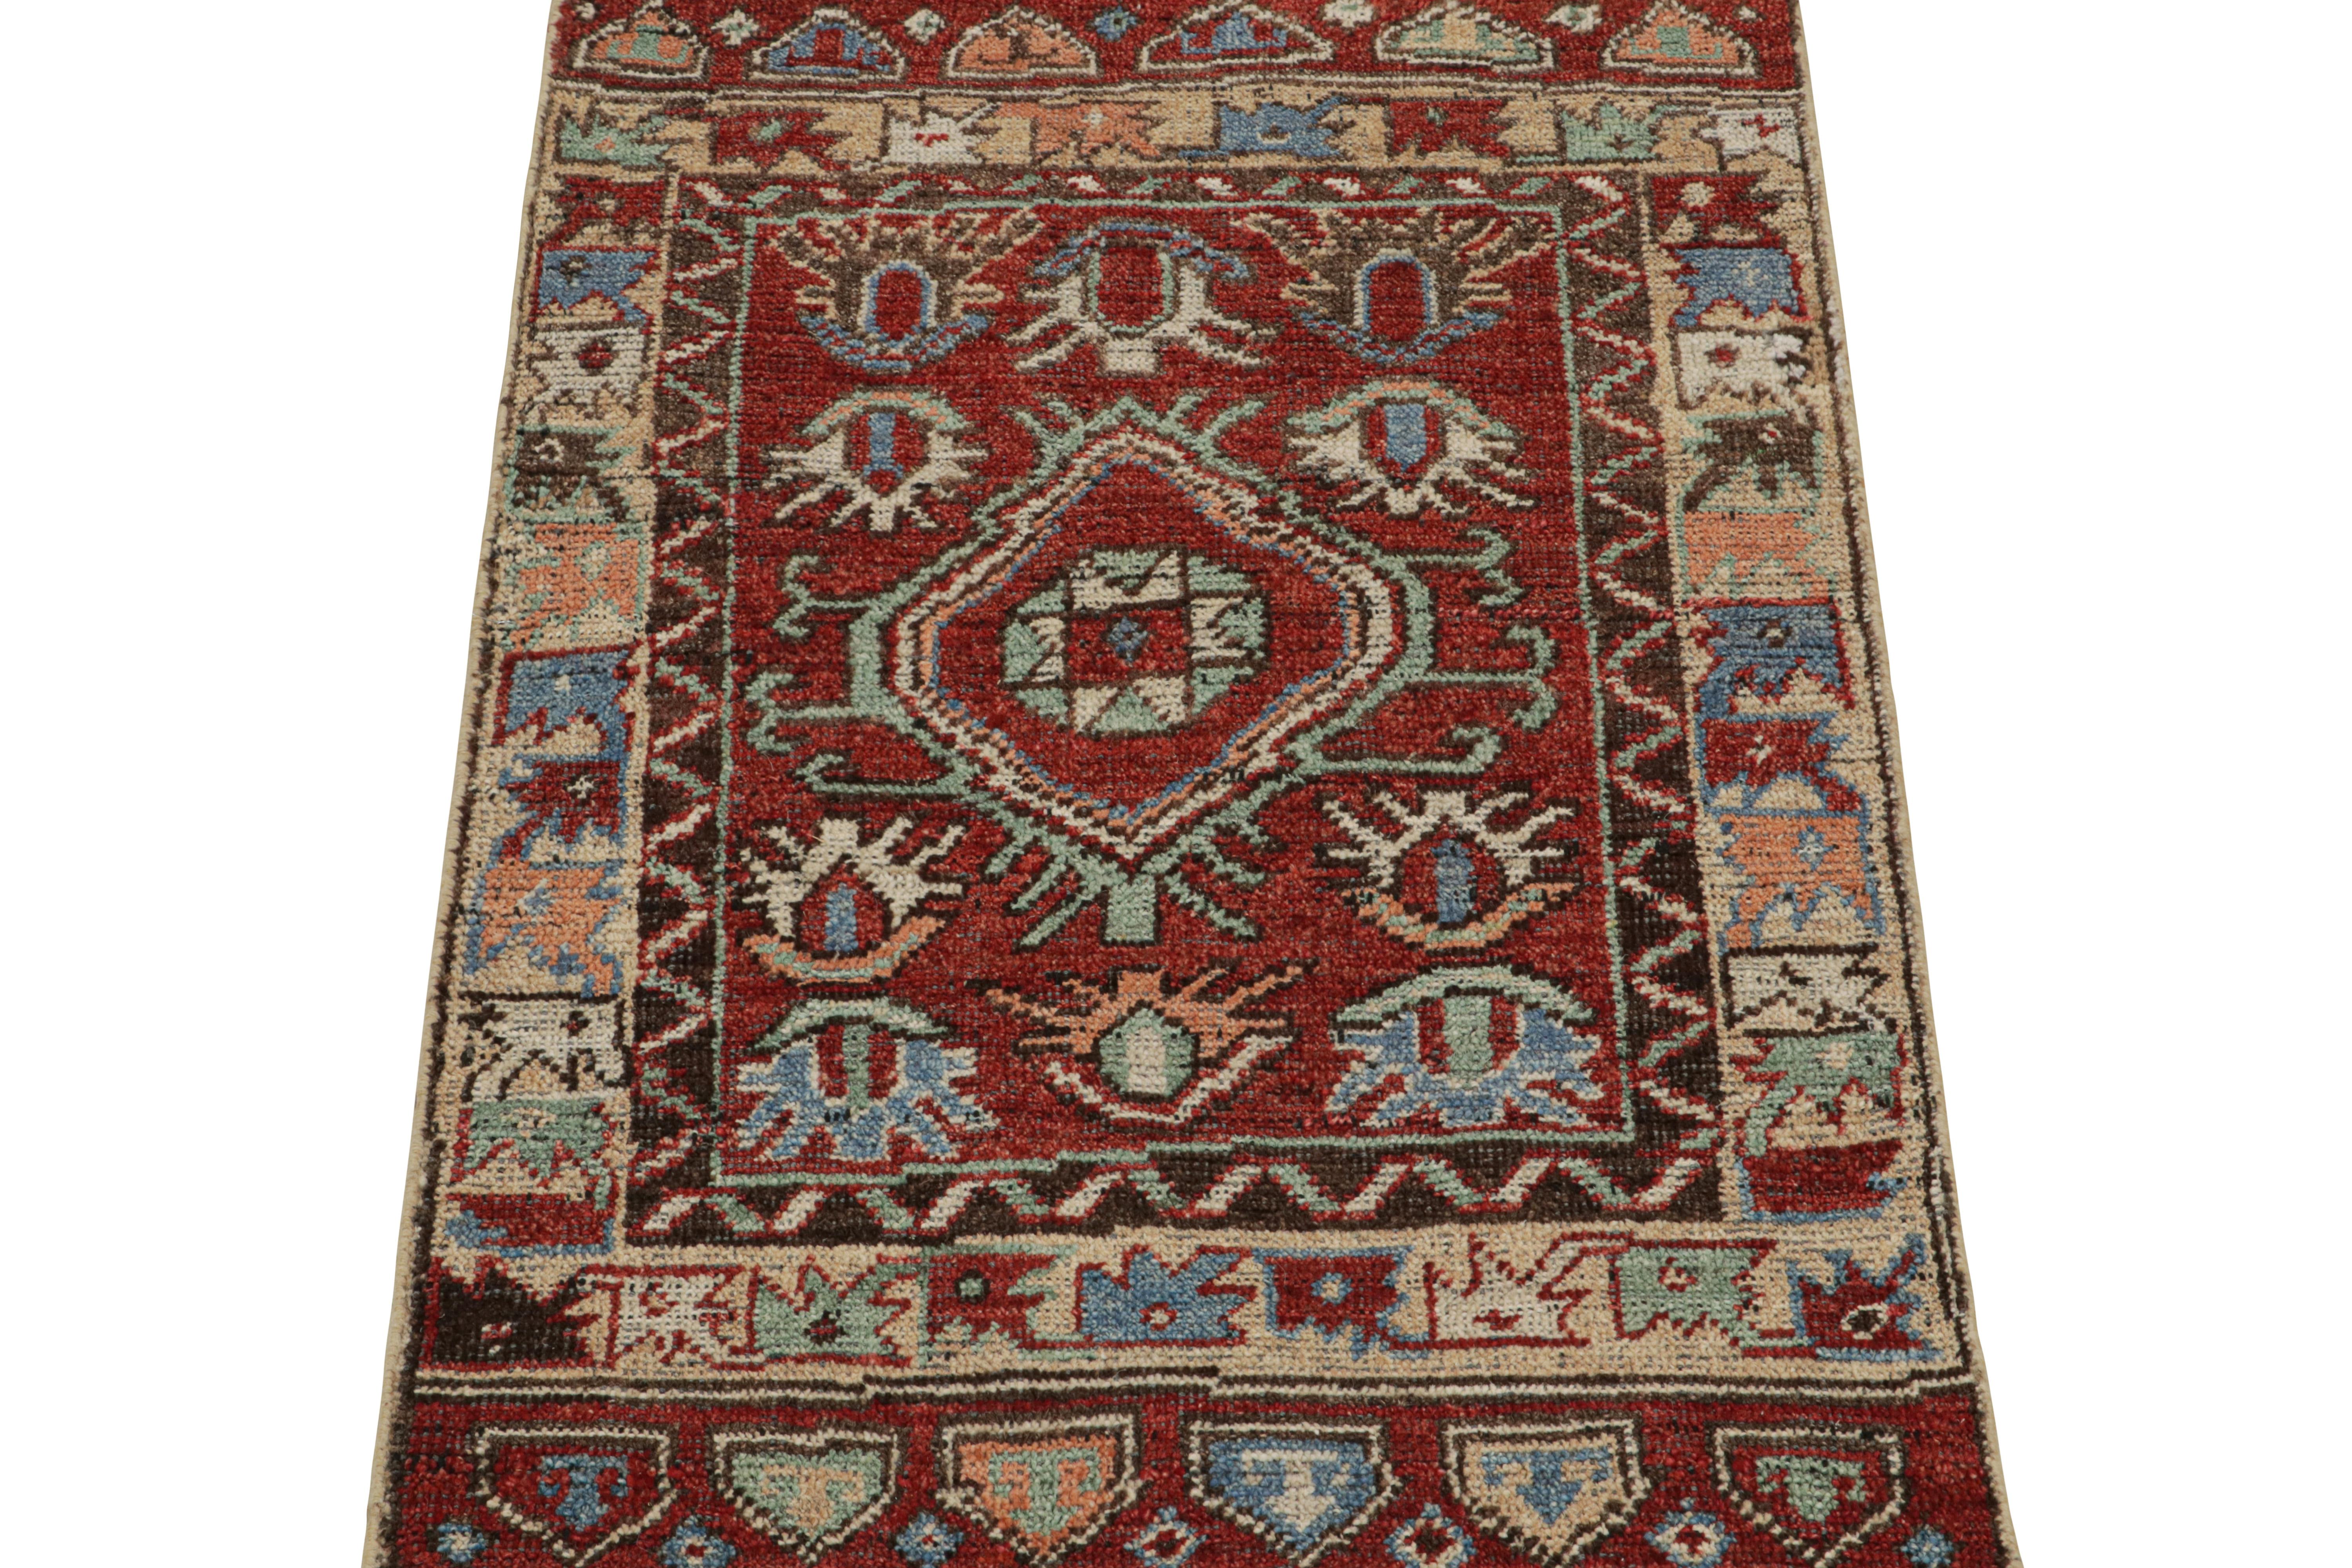 This 2x3 rug is a grand new entry to Rug & Kilim’s custom classics Burano collection. Hand-knotted in wool.

On the Design: 

This rug is inspired by antique tribal rugs & features primitivist geometric patterns in vibrant tones of red, blue,